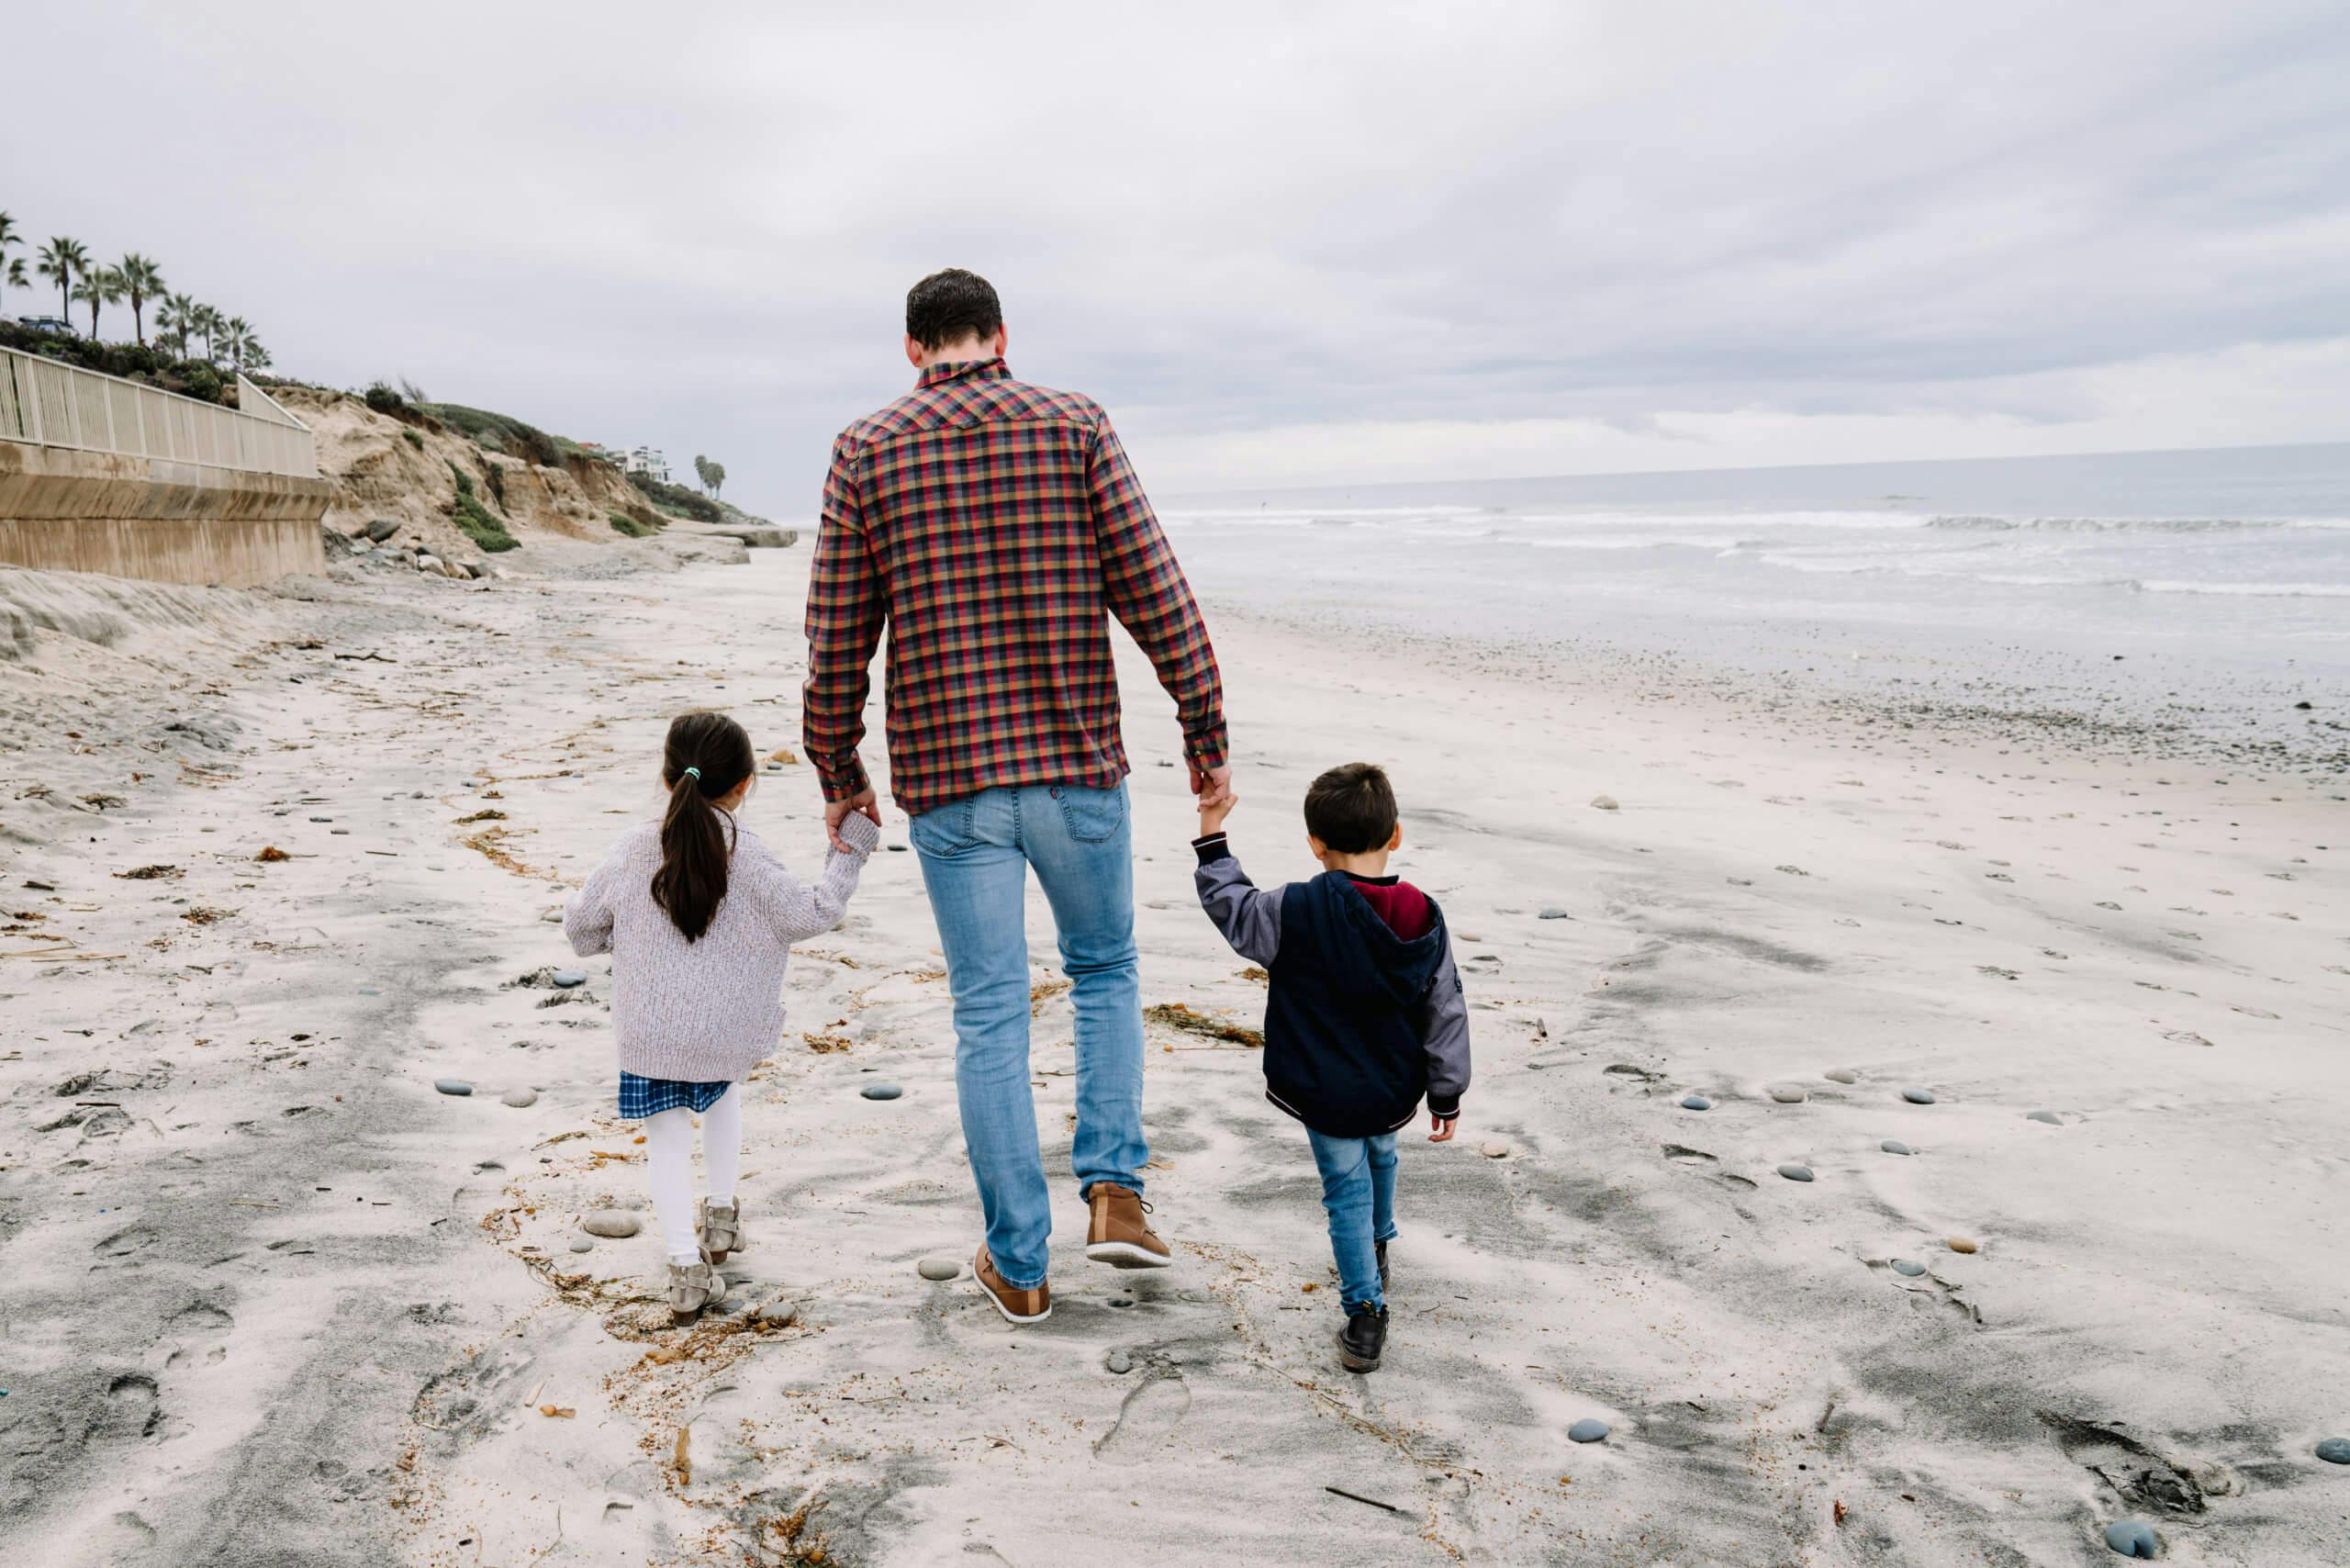 A man walking on the beach holding hands with two young children